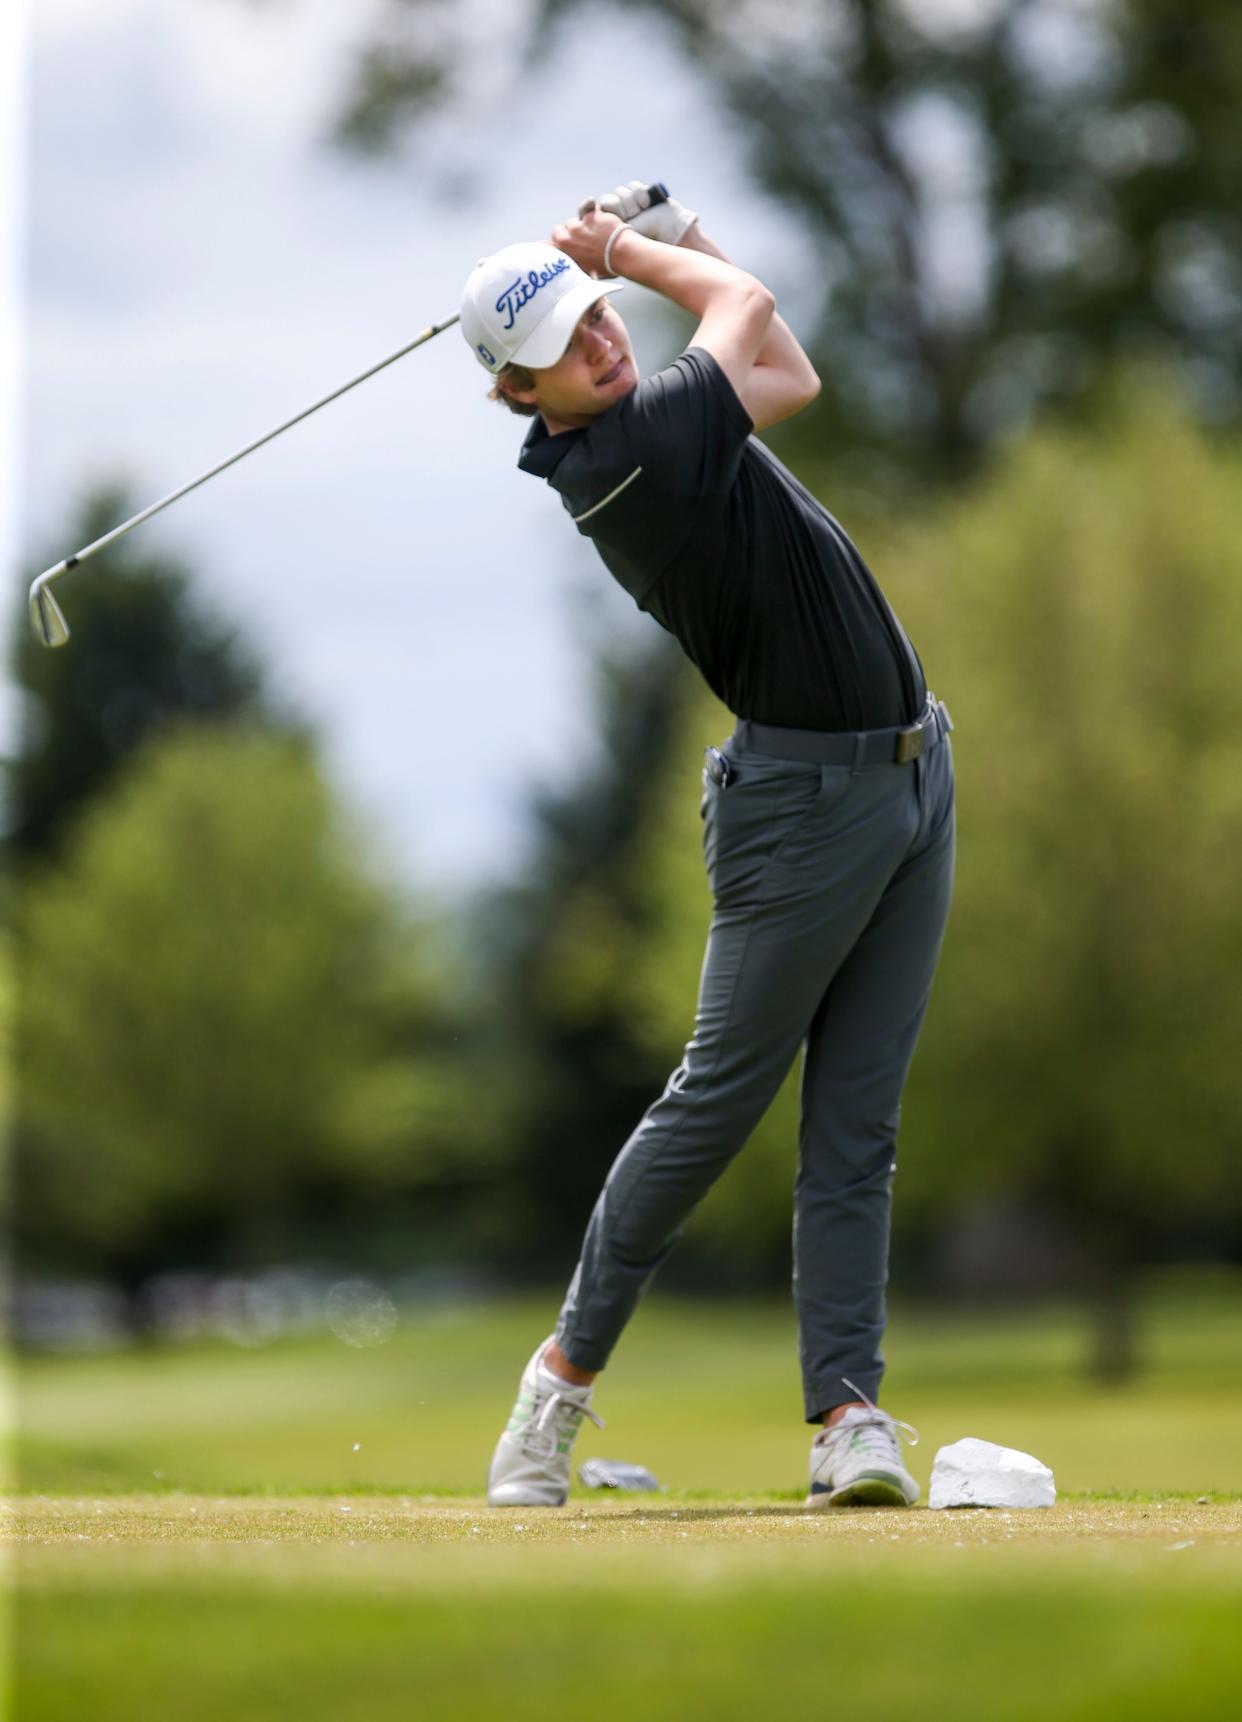 McNary's Elijah Clendening drives the ball during the 6A boys state golf championship on Monday, May 16, 2022 at Trysting Tree Golf Club in Corvallis, Ore.